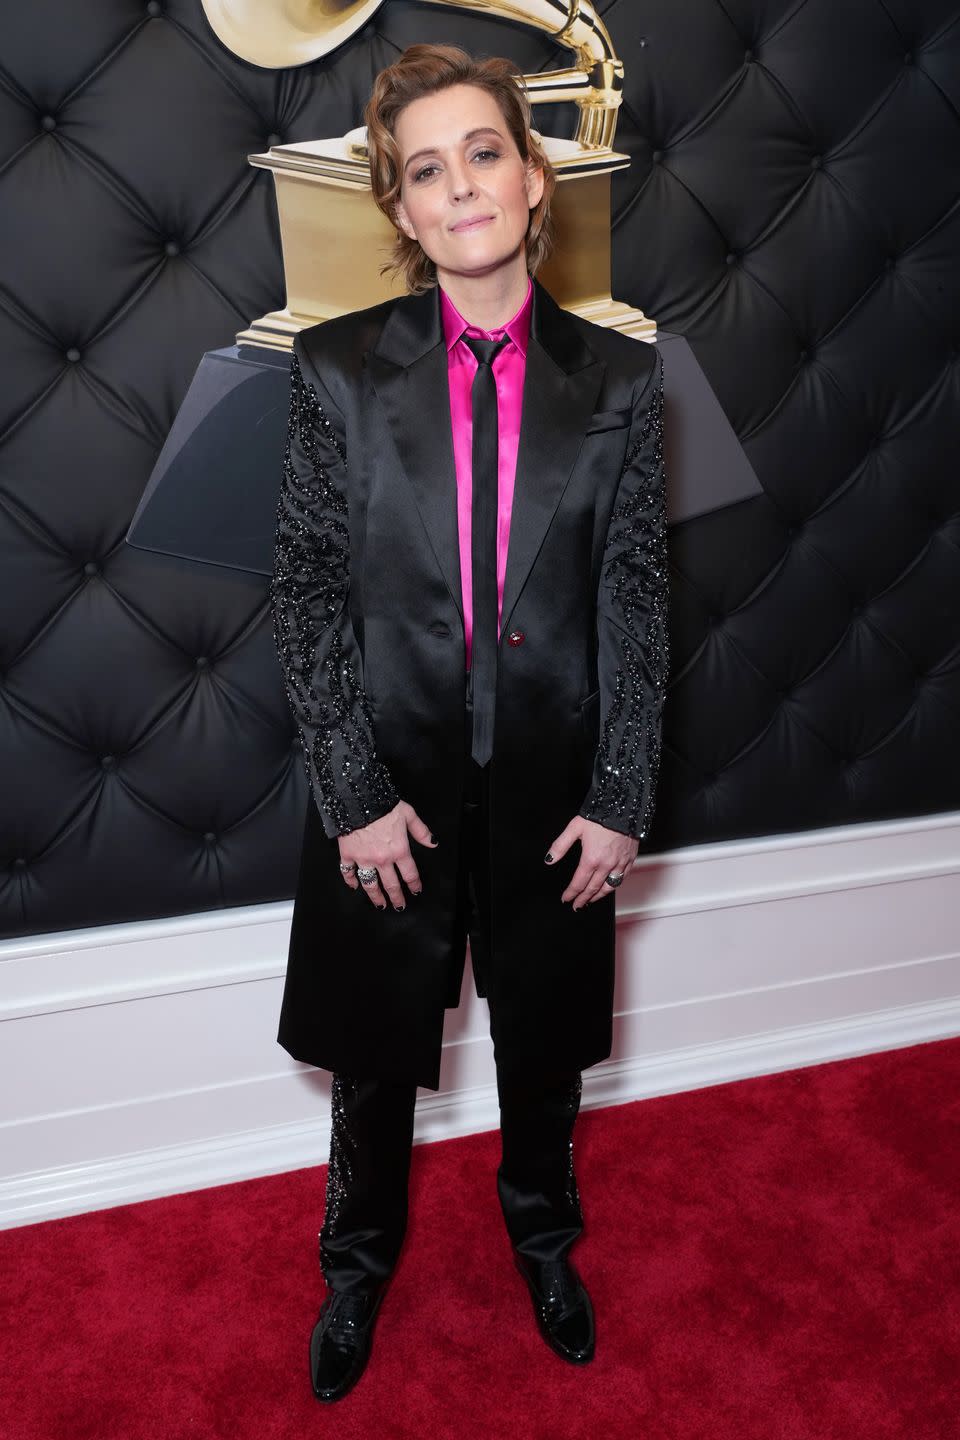 <p>Brandi Carlile knows about a good suit, and tonight she opted for a black satin two-piece suit by Versace, worn with a hot pink button-down shirt and an ultra-skinny black tie. The suit hit at her knees with sleeves and side panels adorned with black sequin embroidery. For footwear, she went with oxfords, which frankly more celebrities should consider instead of the standard pump.</p>